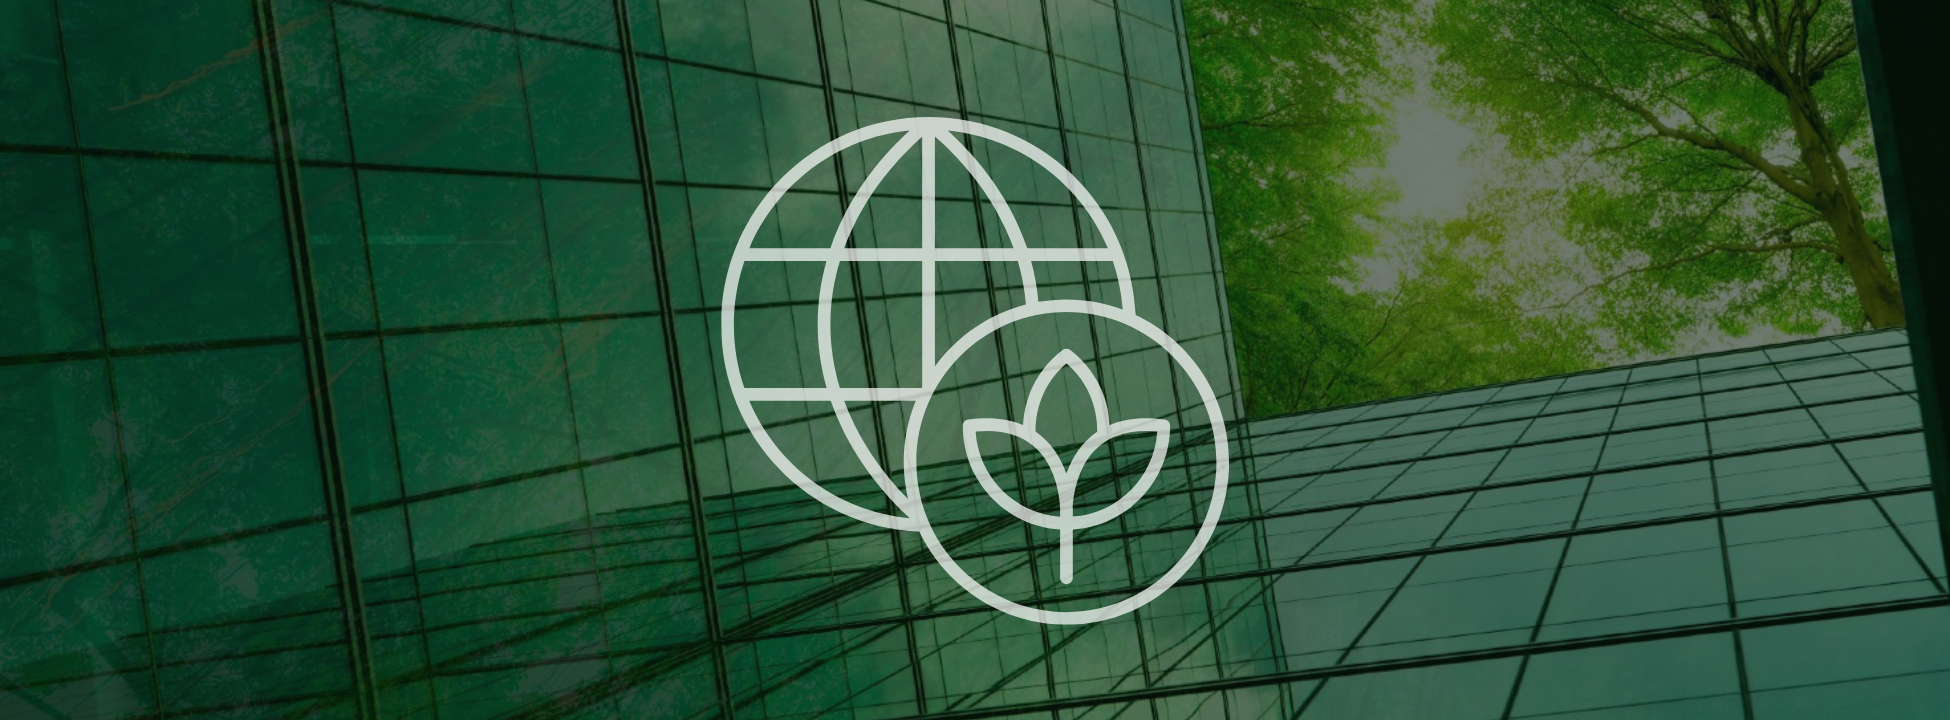 Earth Sustainability icon over green tree building